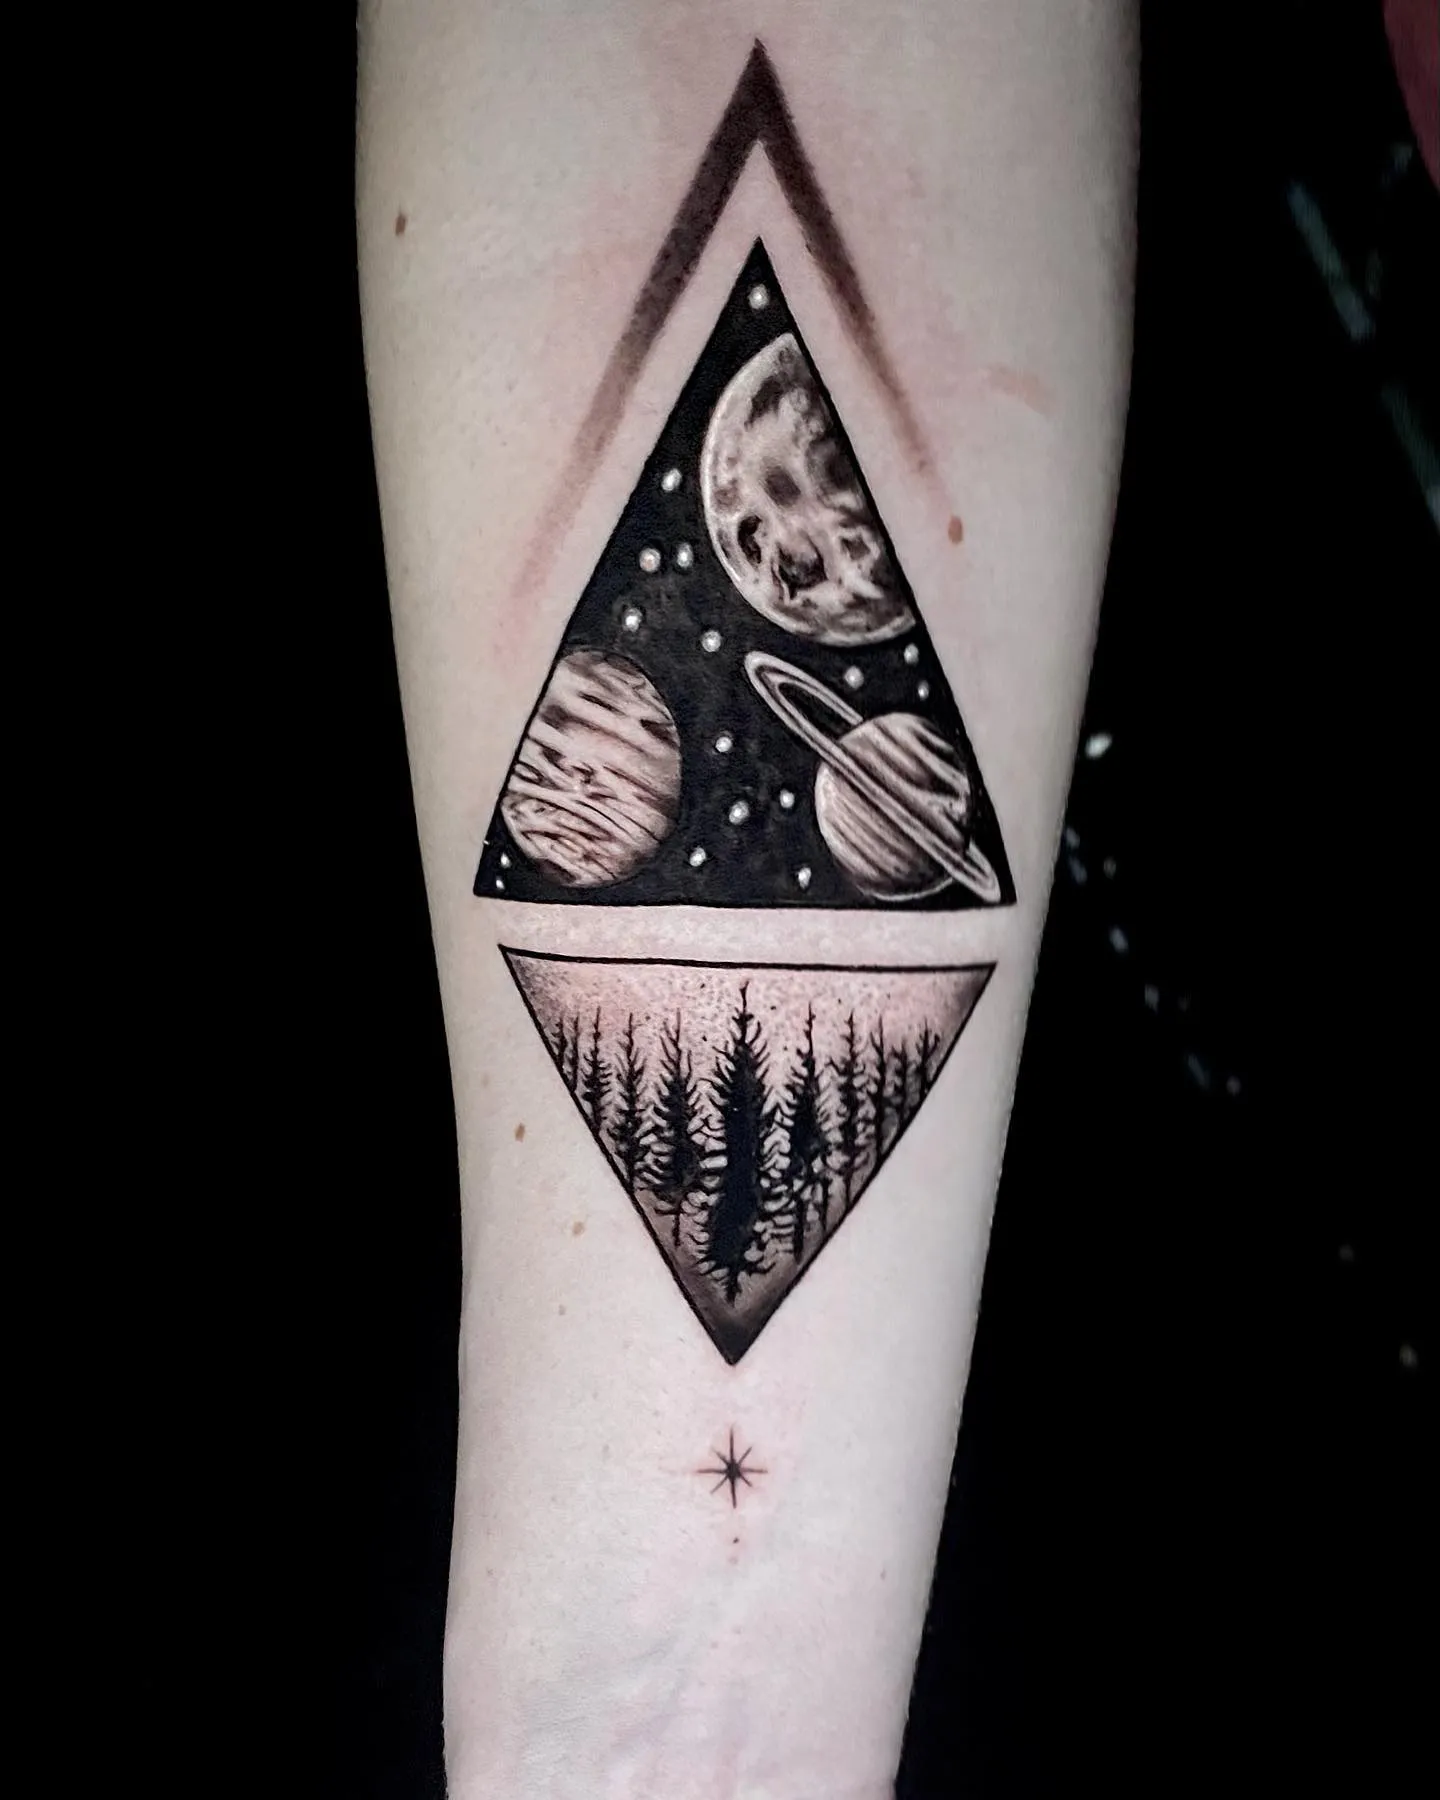 Cosmic Voyage in Double Triangle Ink